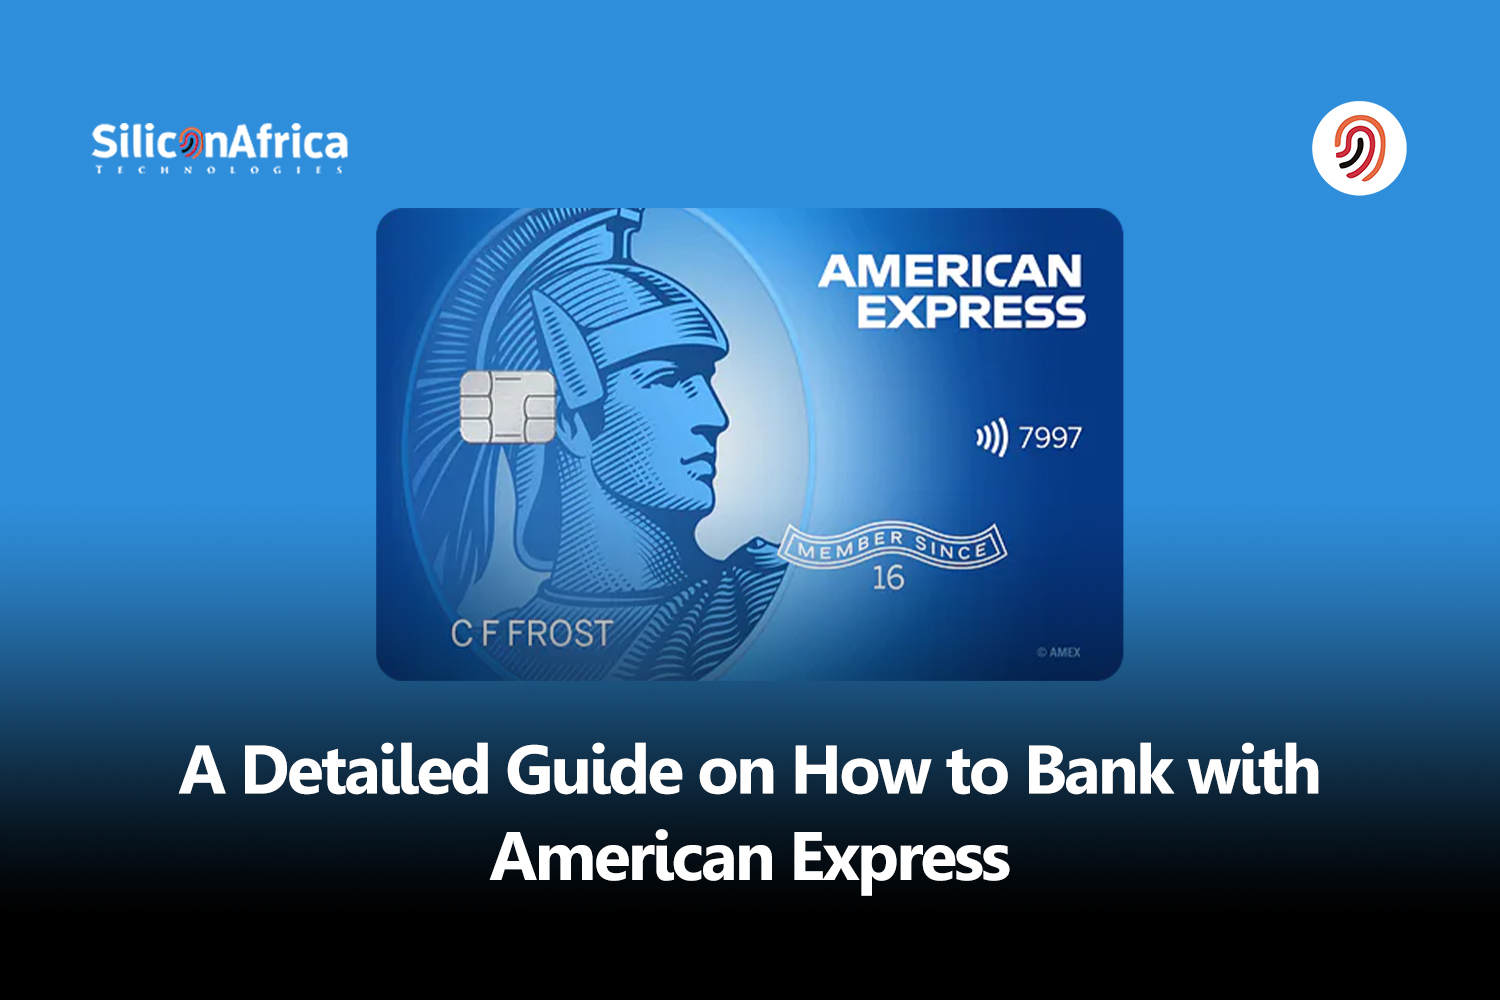 Banking with American Express